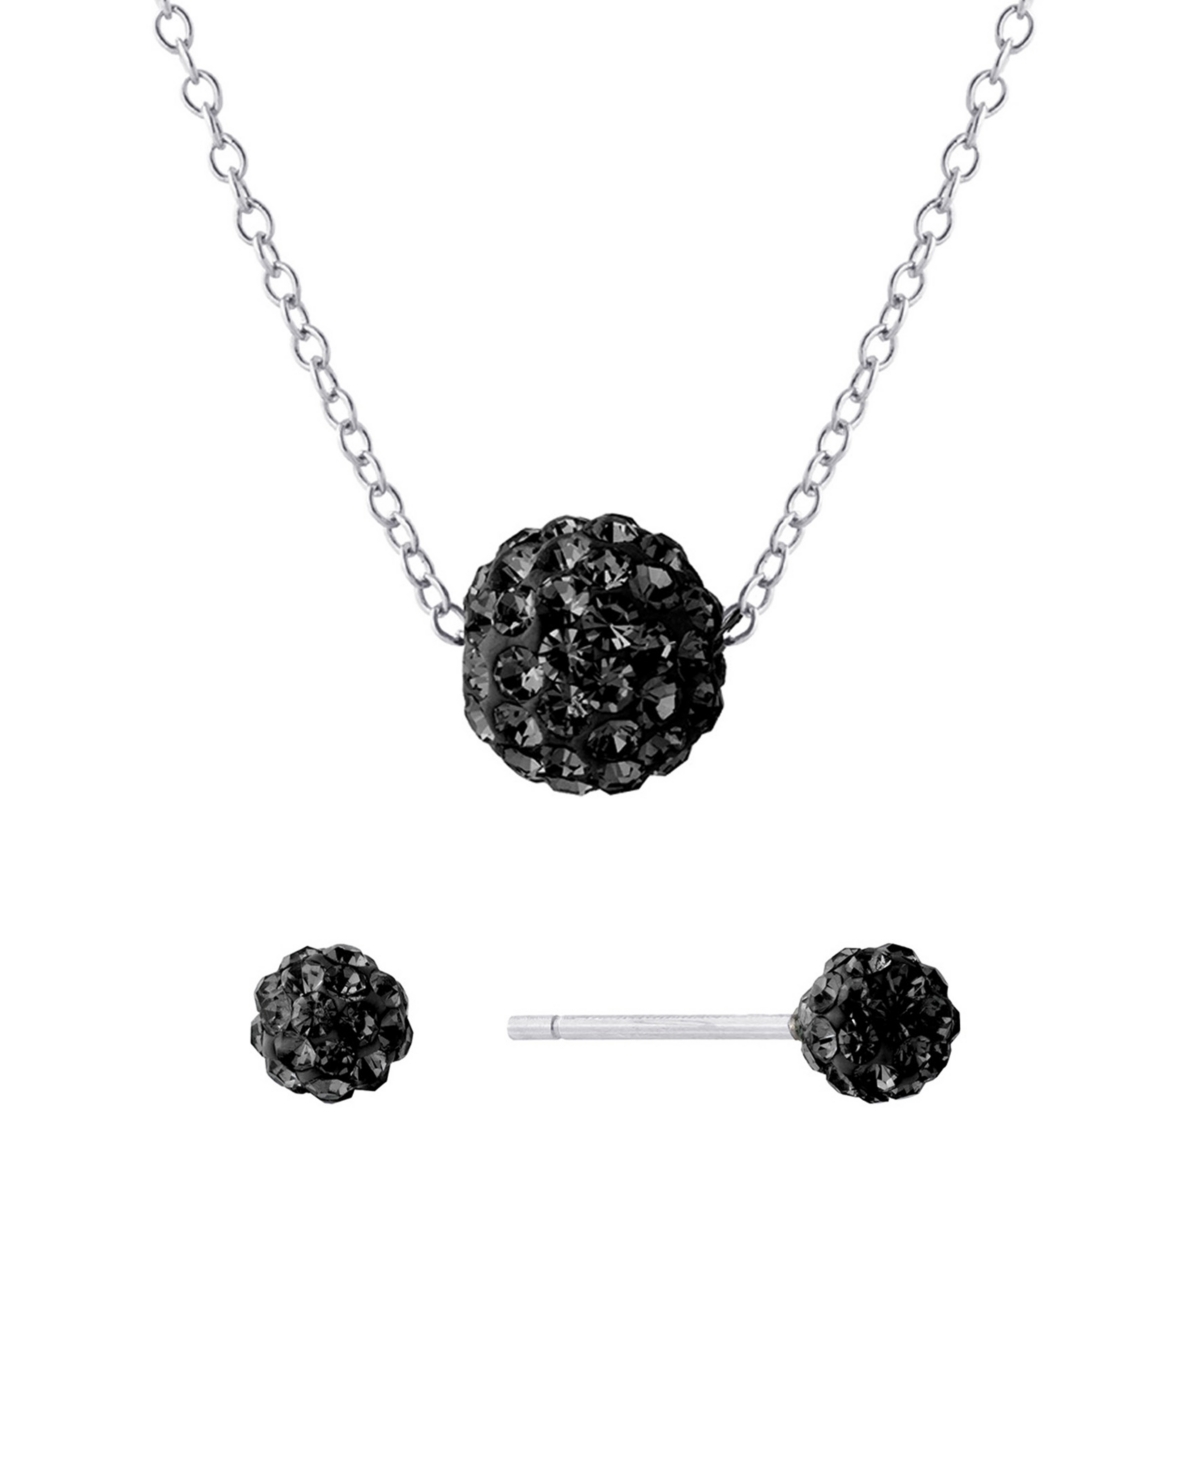 Giani Bernini Gianni Bernini 2-piece Clear Crystal Pave Ball Stud Necklace Set (1.2 Ct. T.w.) In Sterling Silver In Black